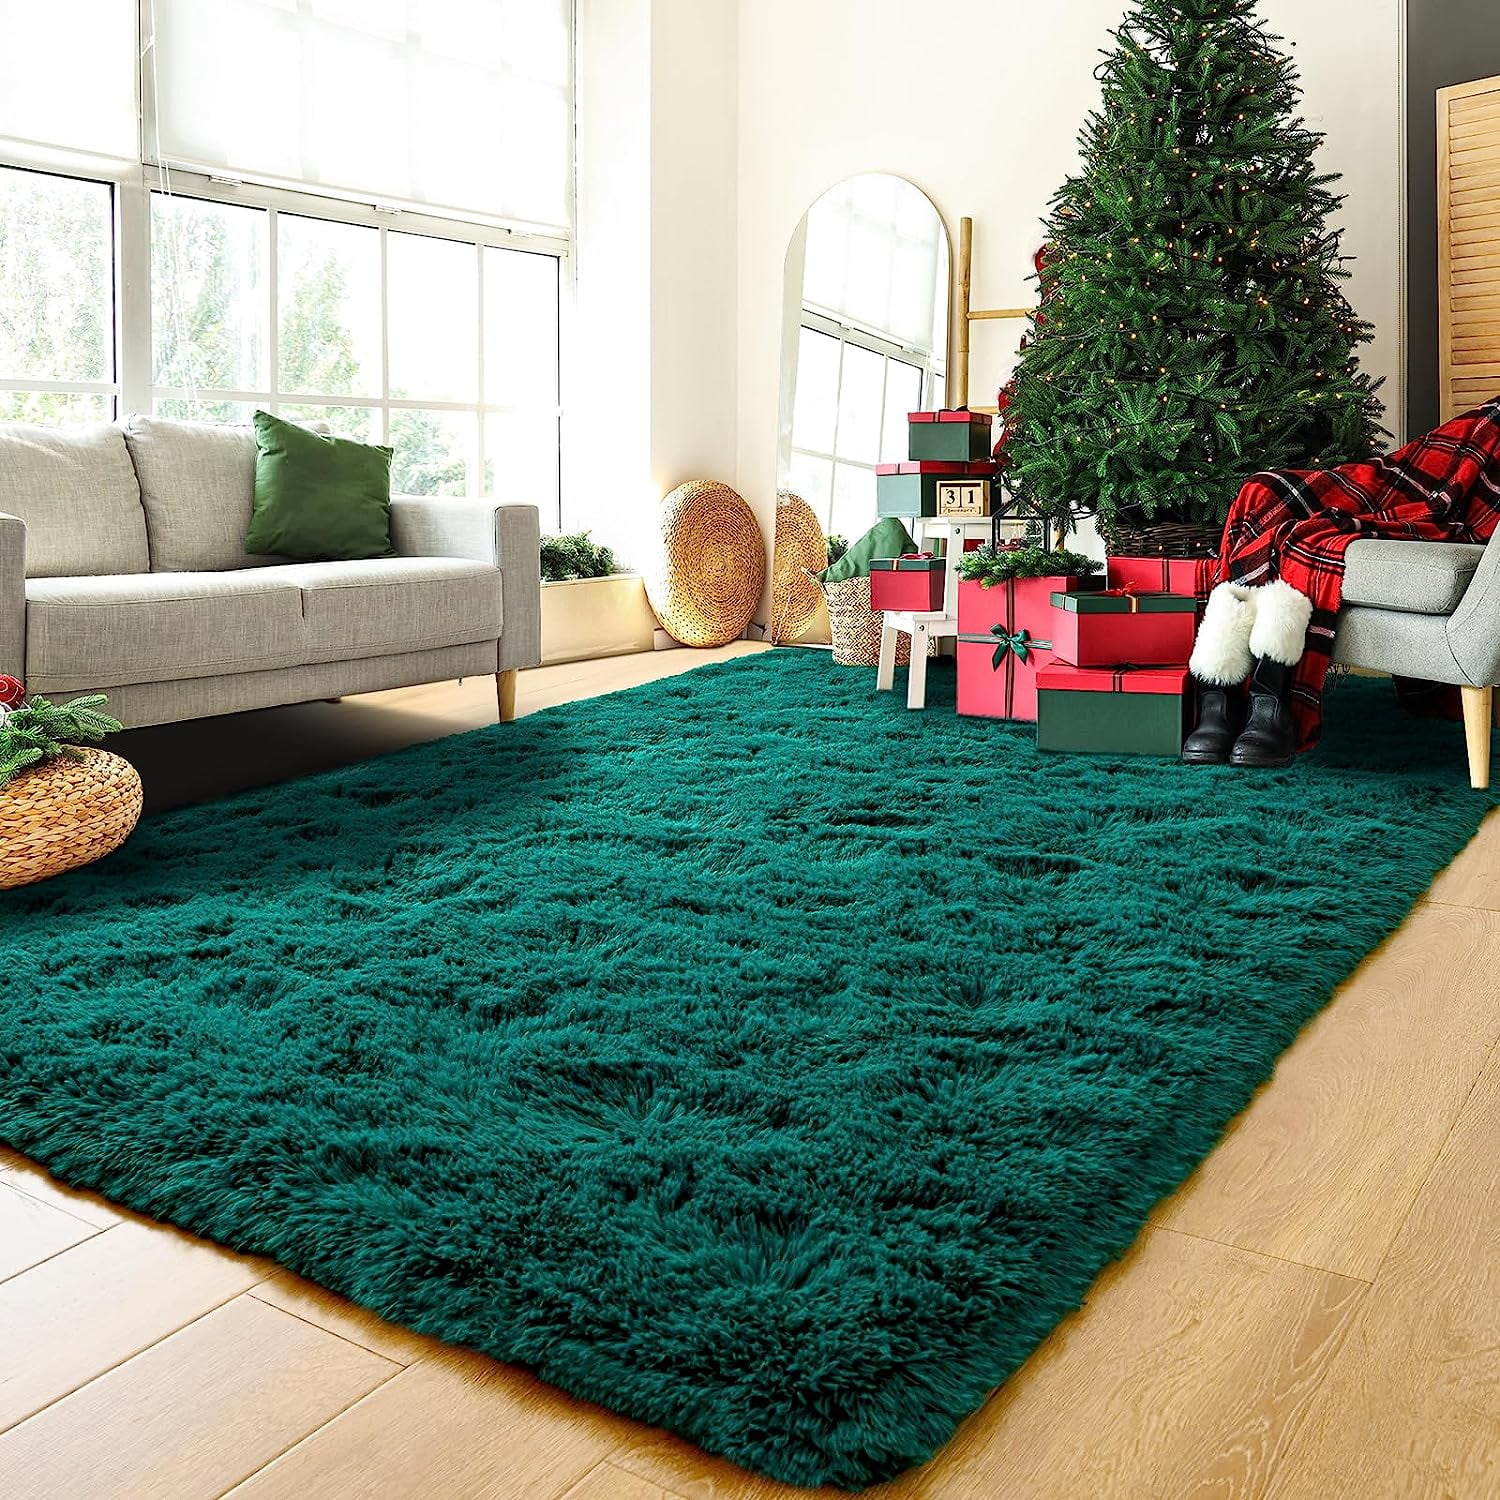 Super Soft Plush Nursery Carpet Non Slip Bedroom, Living Room, And  Childrens Room Rug For Home Decoration 230928 From Bian09, $50.15